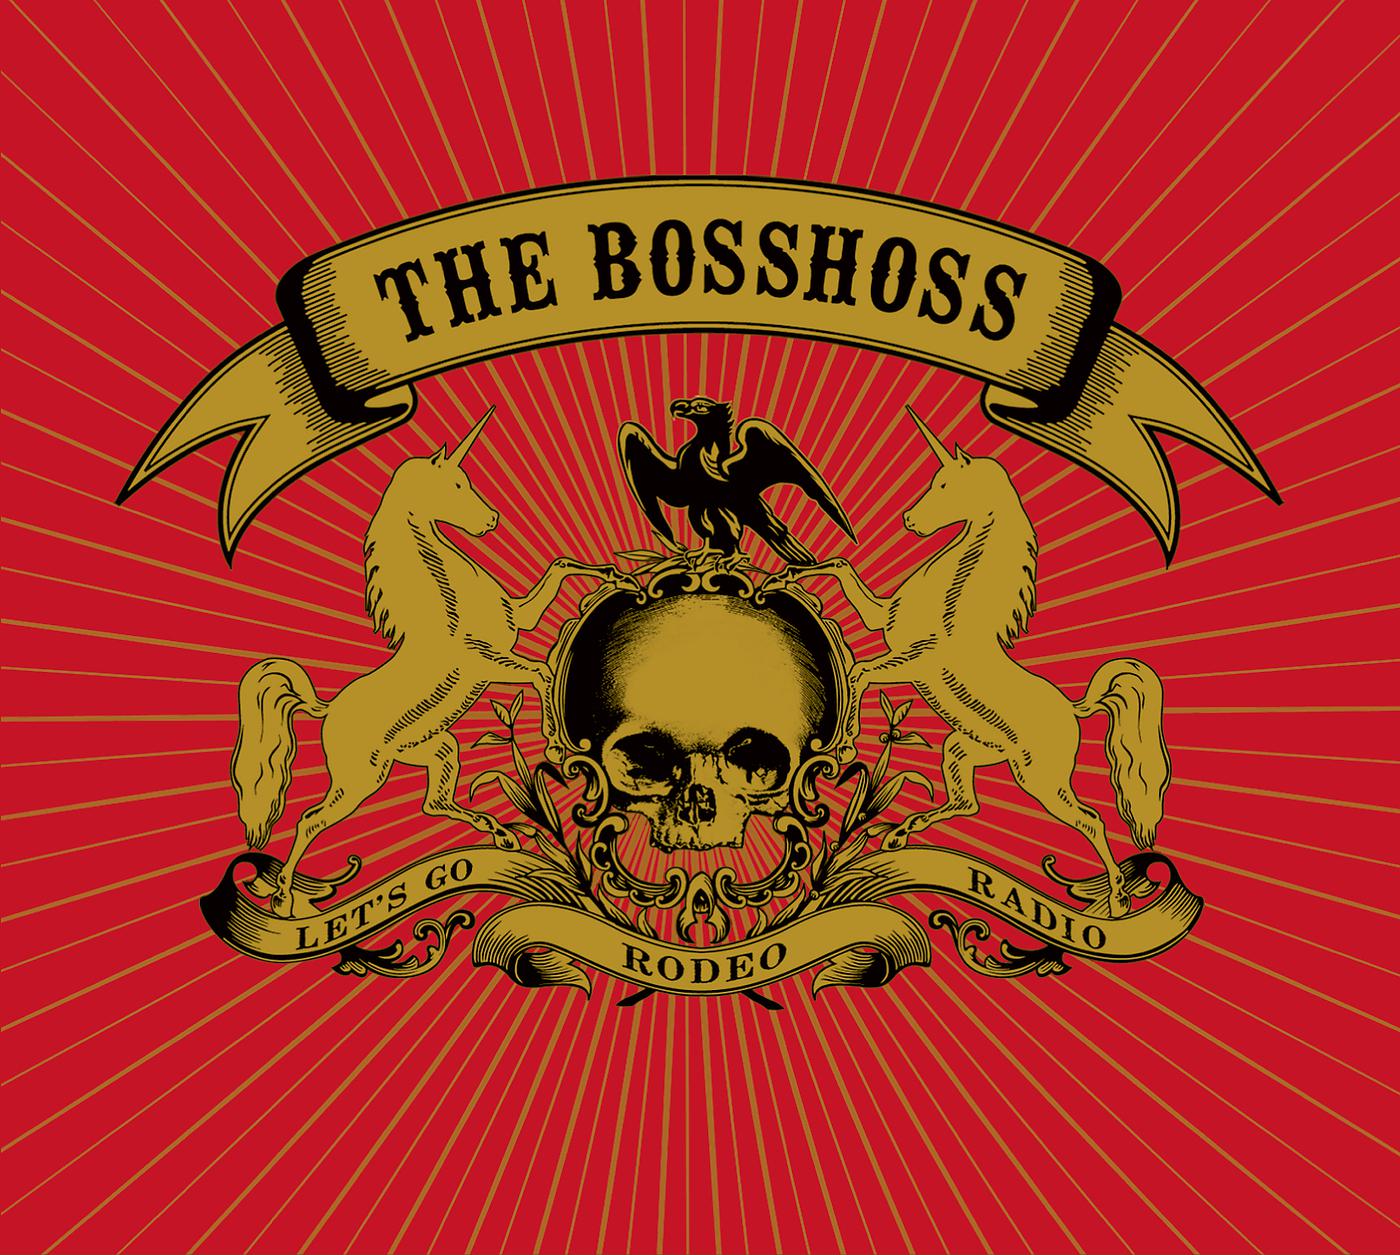 Comes on the radio. BOSSHOSS. The BOSSHOSS - Rodeo Radio (2006). Rodeo обложка. The BOSSHOSS Rodeo Radio обложка.